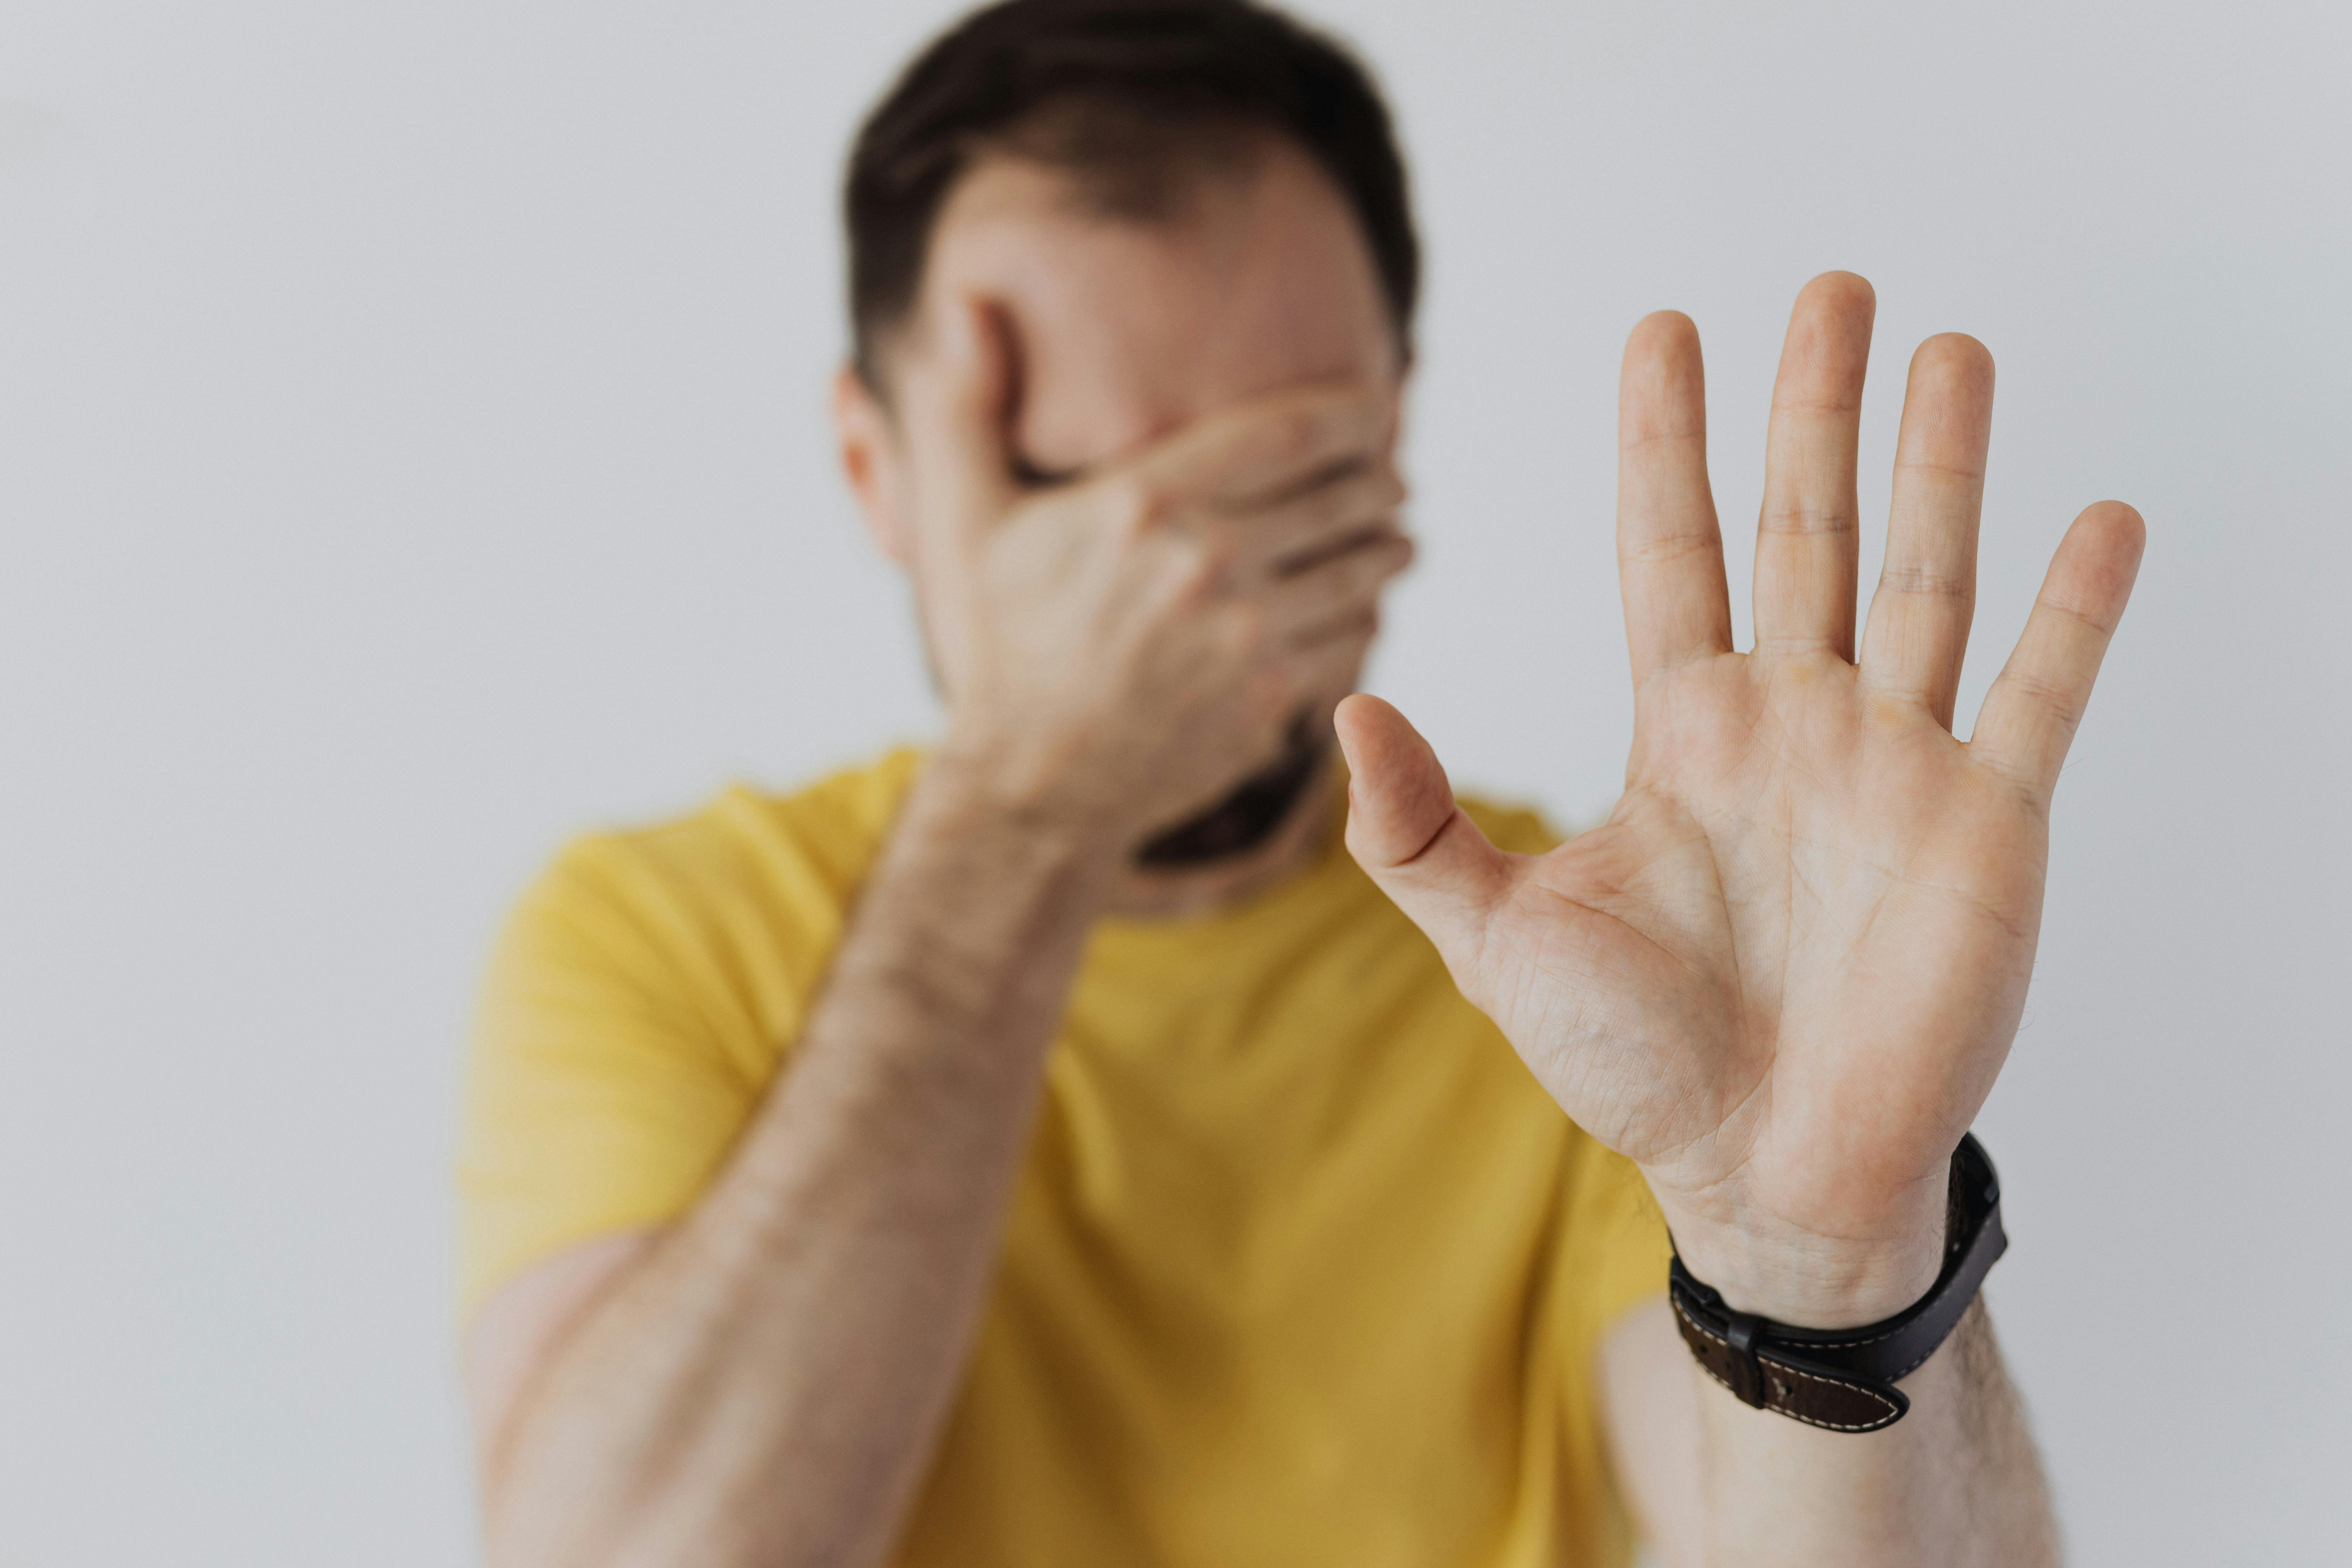 A man showing his palm, indicating "stop" | Source: Pexels